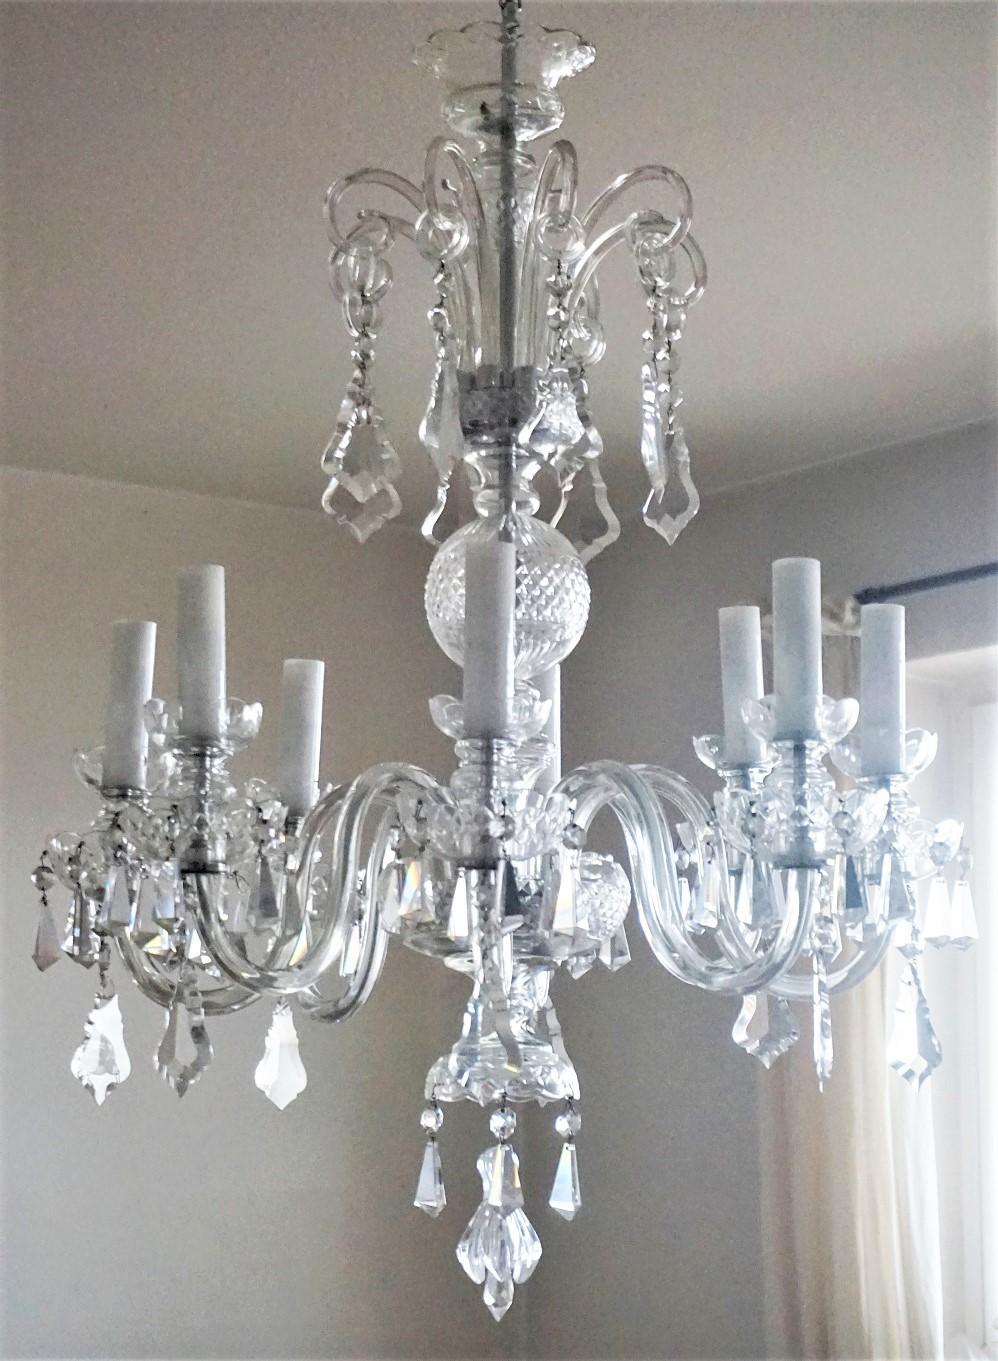 Large Murano Glass Crystal Chandelier, Italy, 1910-1920 For Sale 3